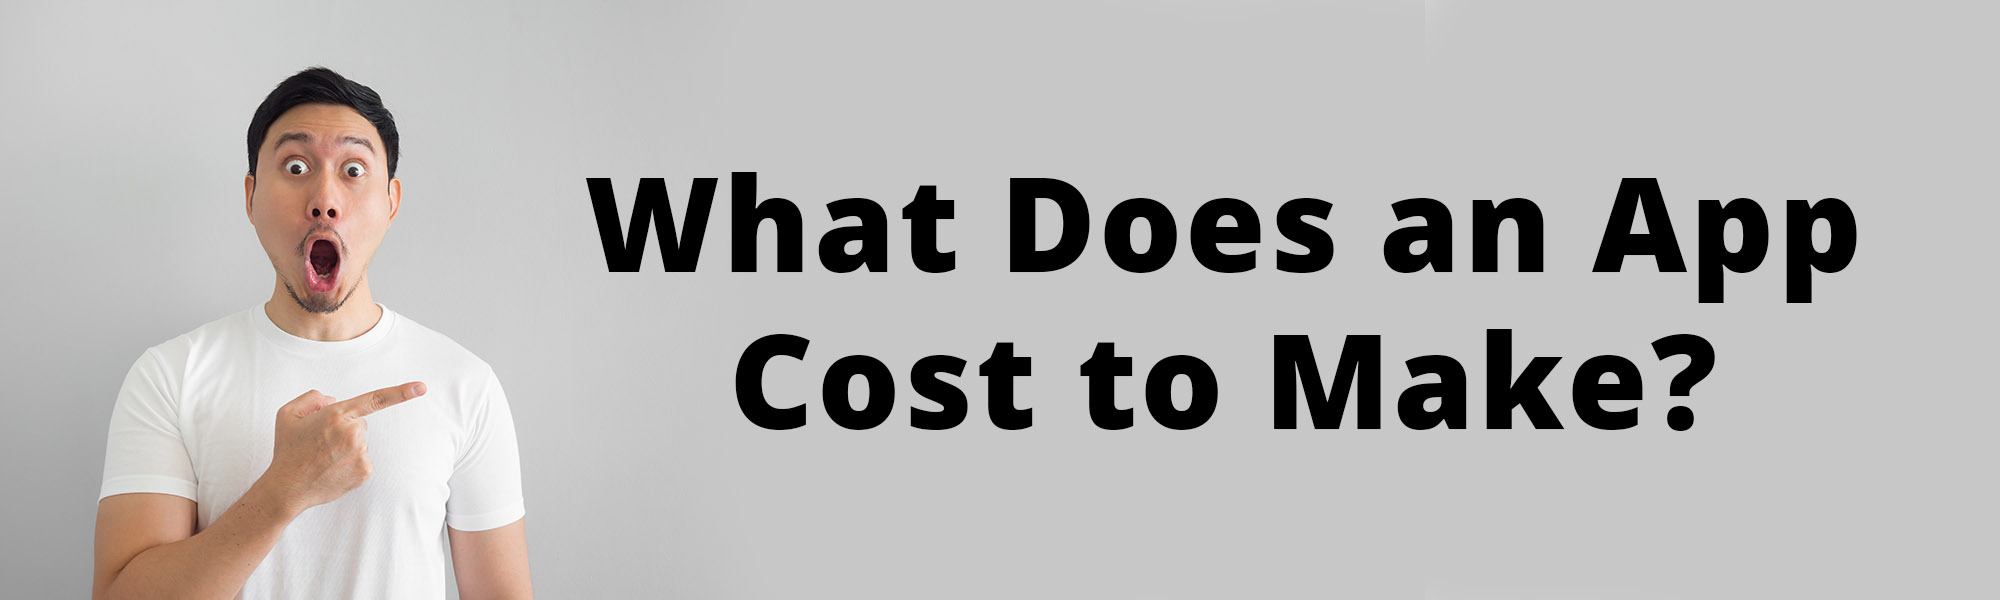 How much does an app cost to make